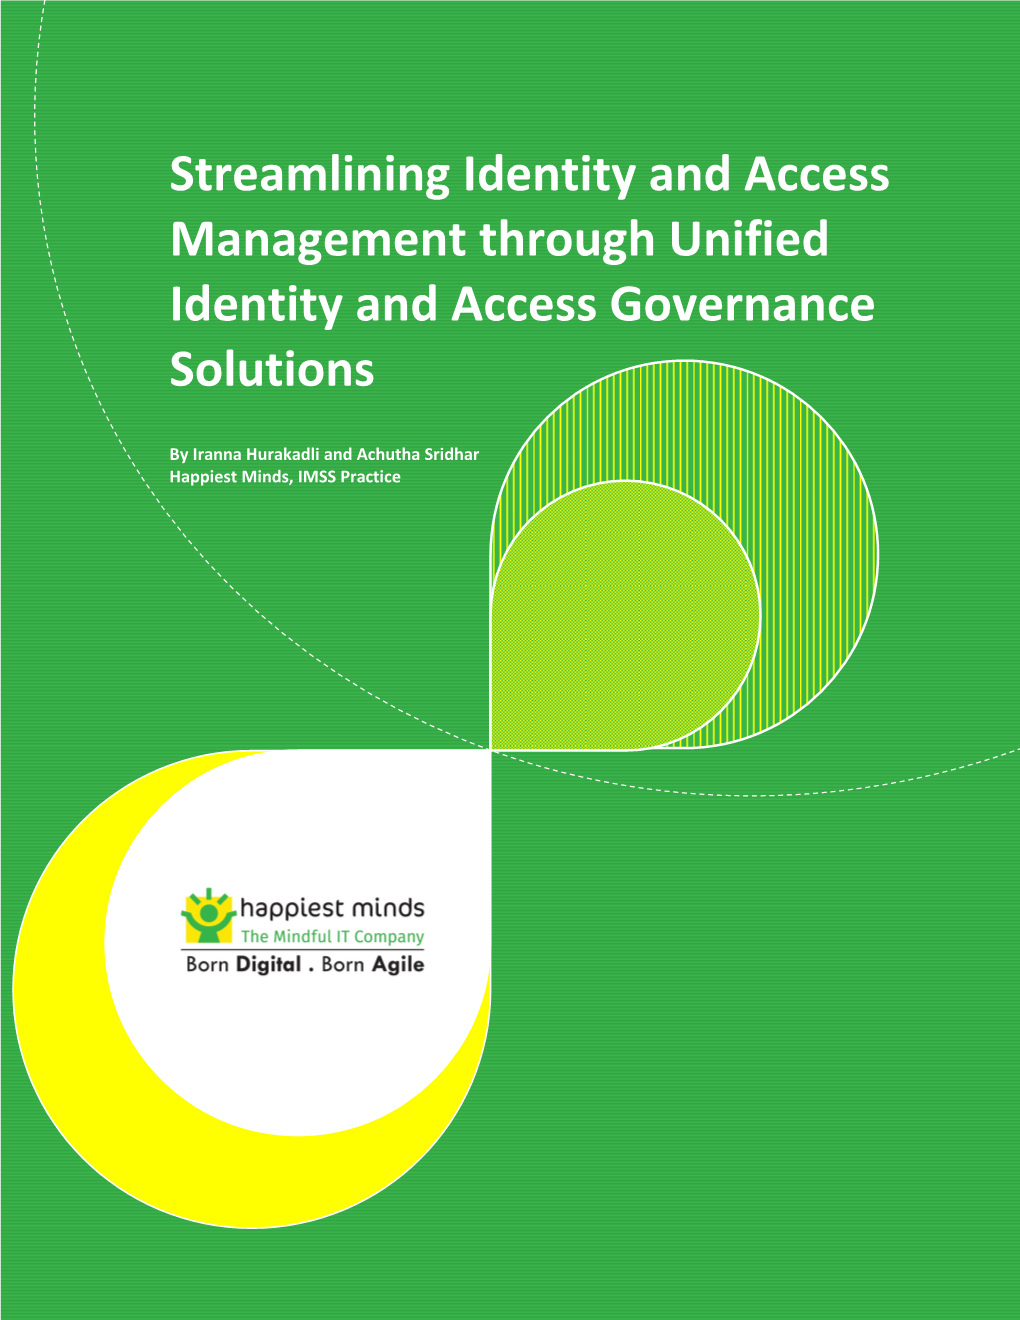 Streamlining Identity and Access Management Through Unified Identity and Access Governance Solutions